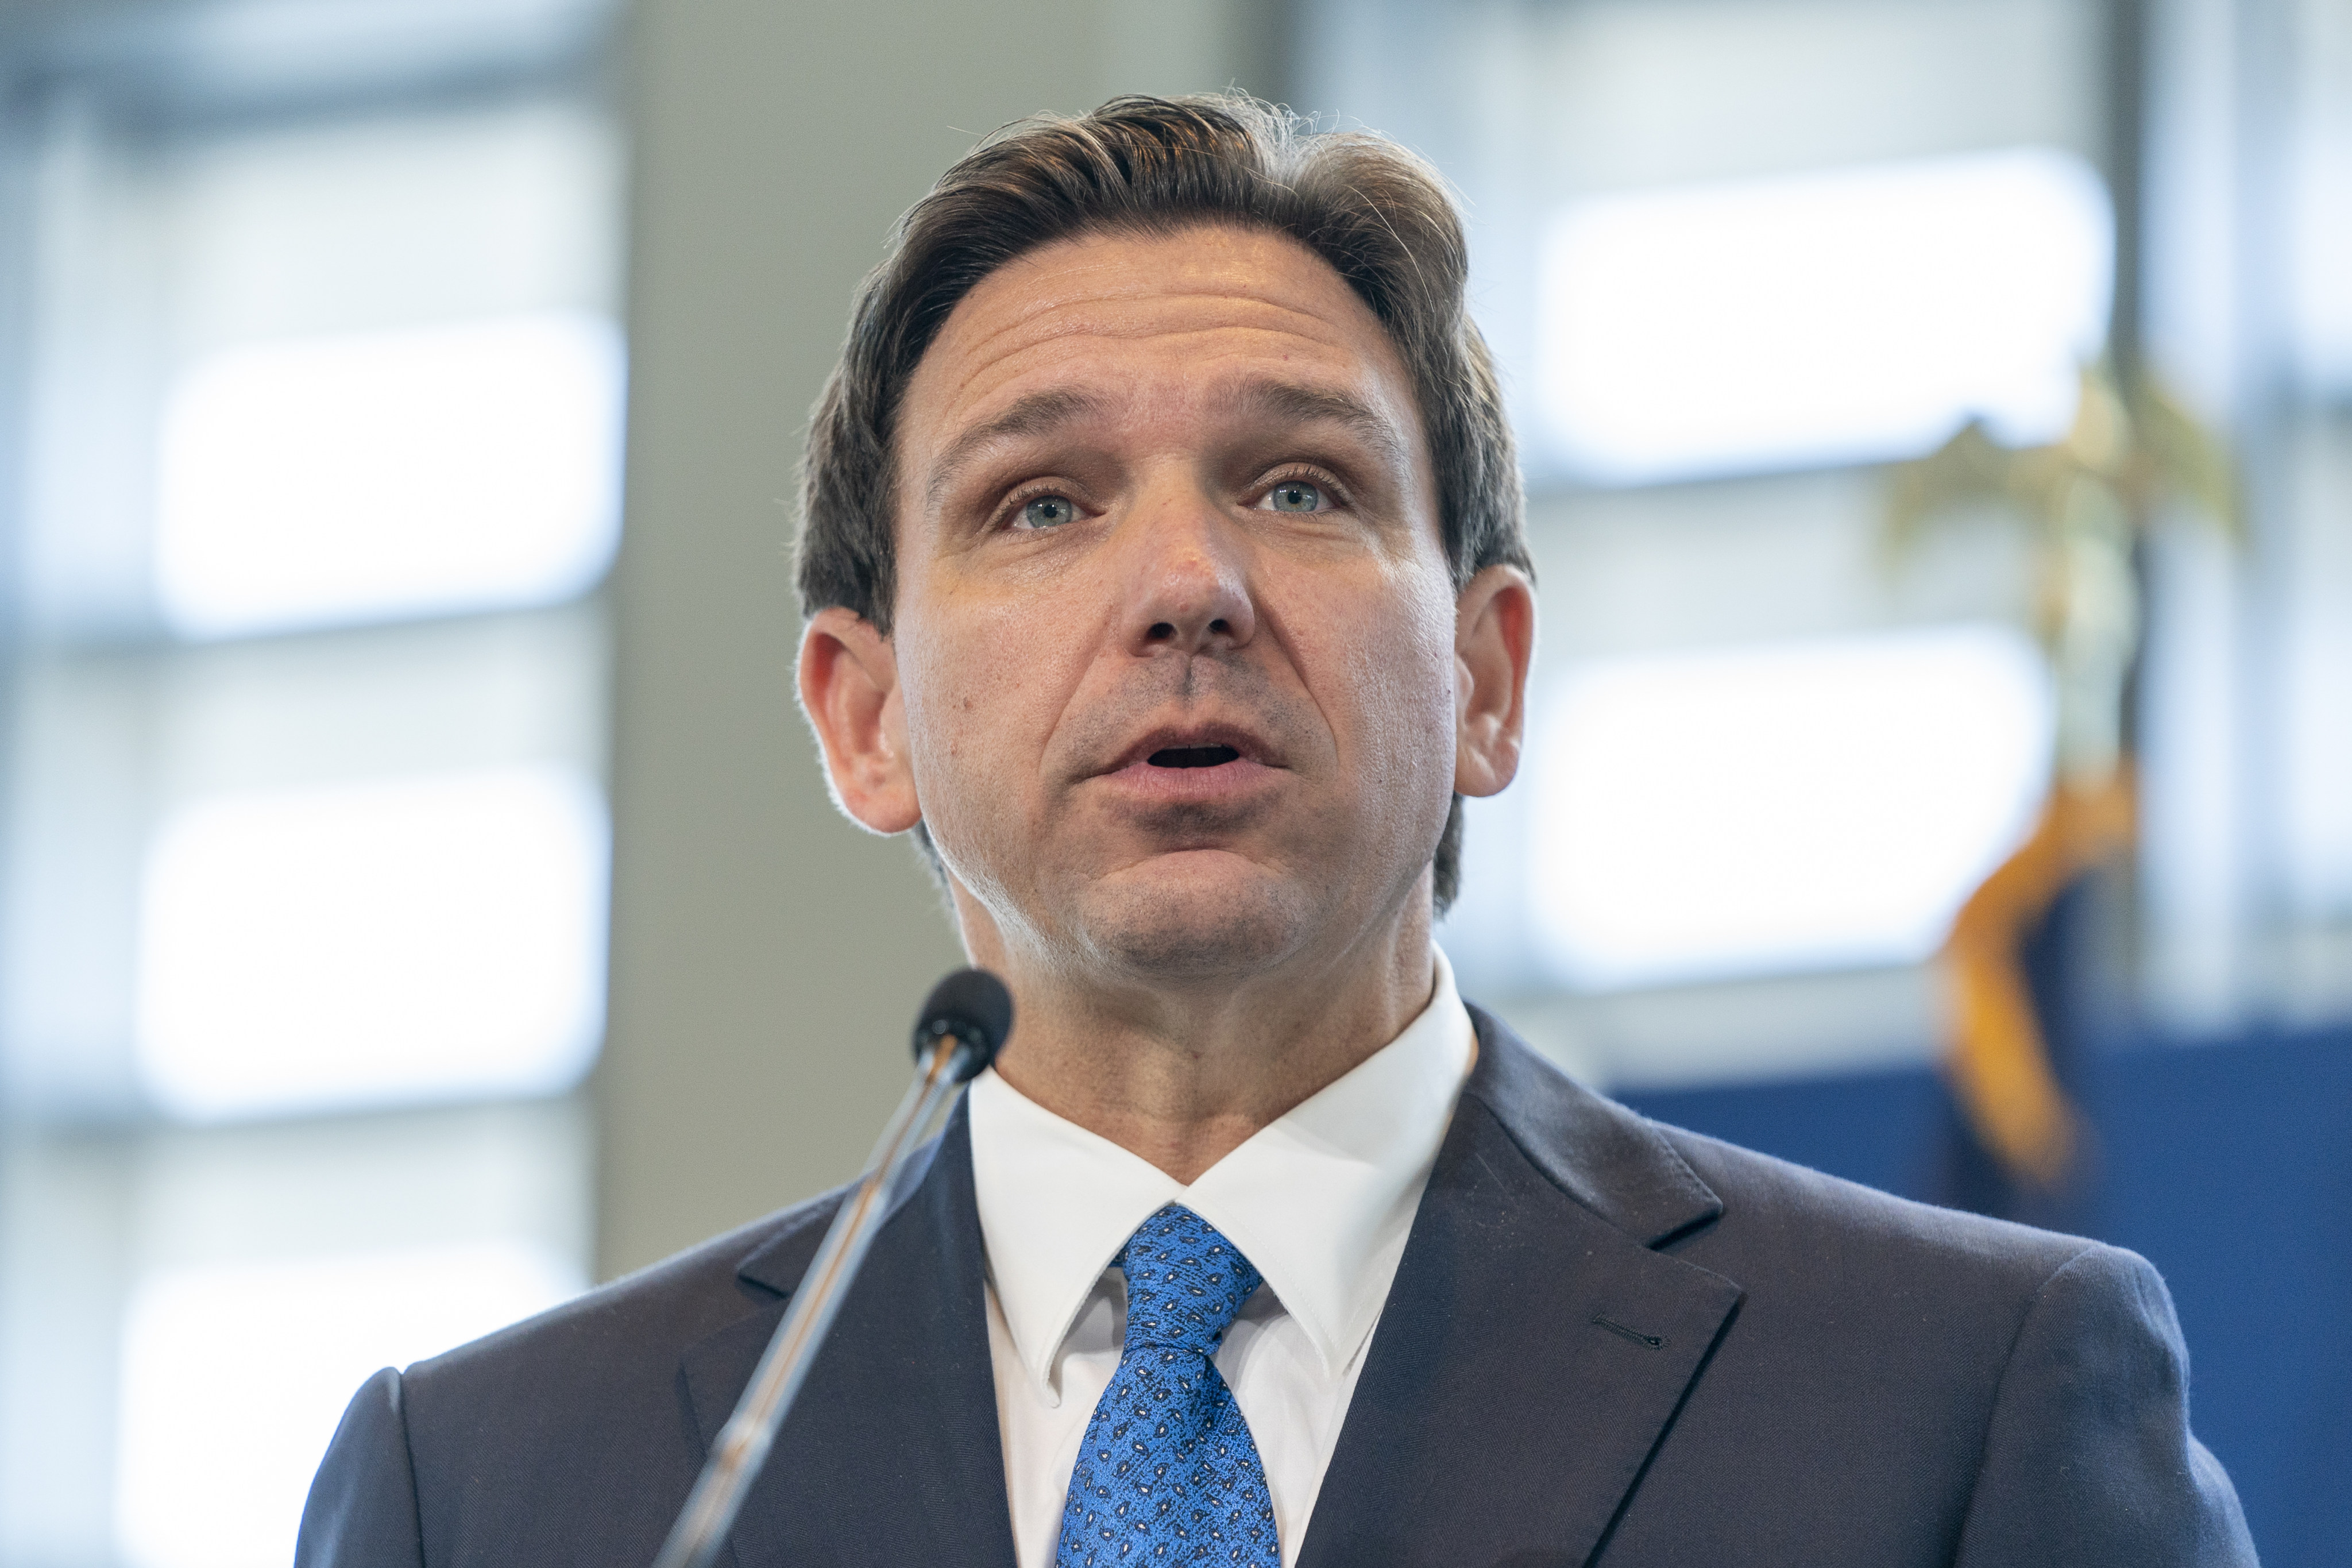 Florida Governor Ron DeSantis speaks at the Heritage Foundation 50th Anniversary Celebration leadership summit in Oxon Hill, Maryland, on Friday. Photo: AP